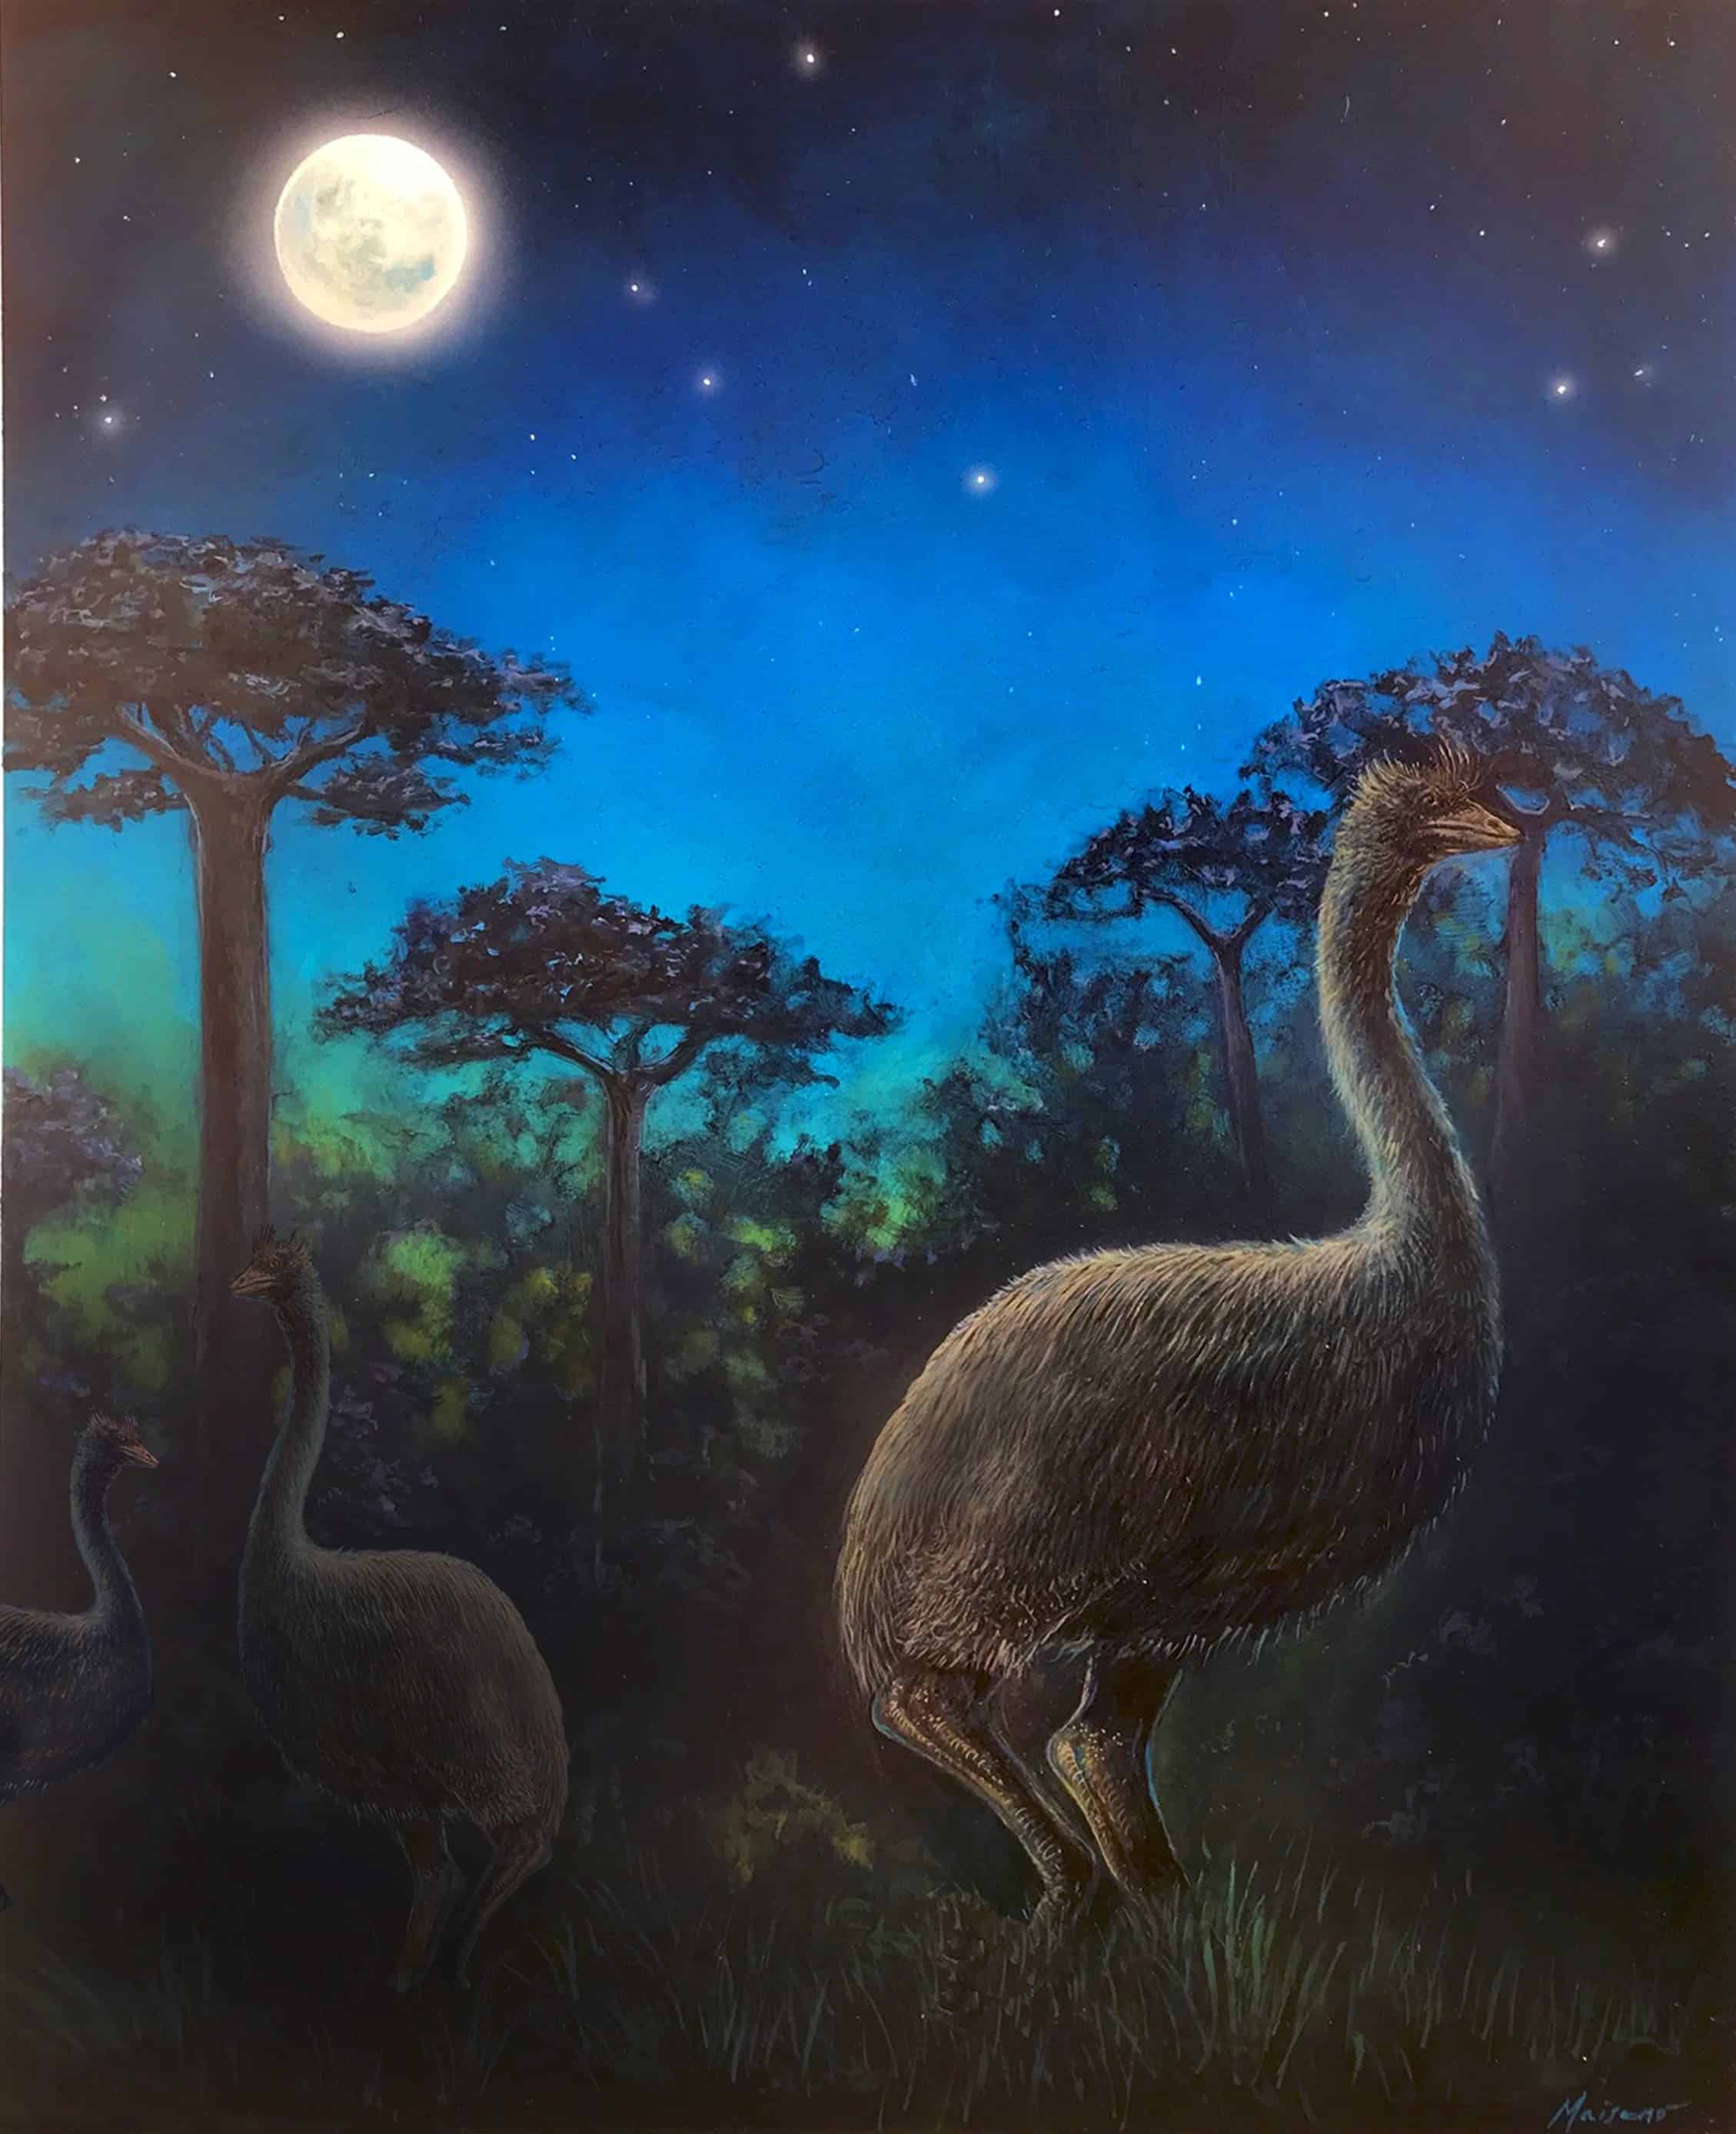 Giant nocturnal elephant birds are depicted foraging in the ancient forests of Madagascar at night. Image credits: John Maisano / University of Texas at Austin Jackson, School of Geosciences.